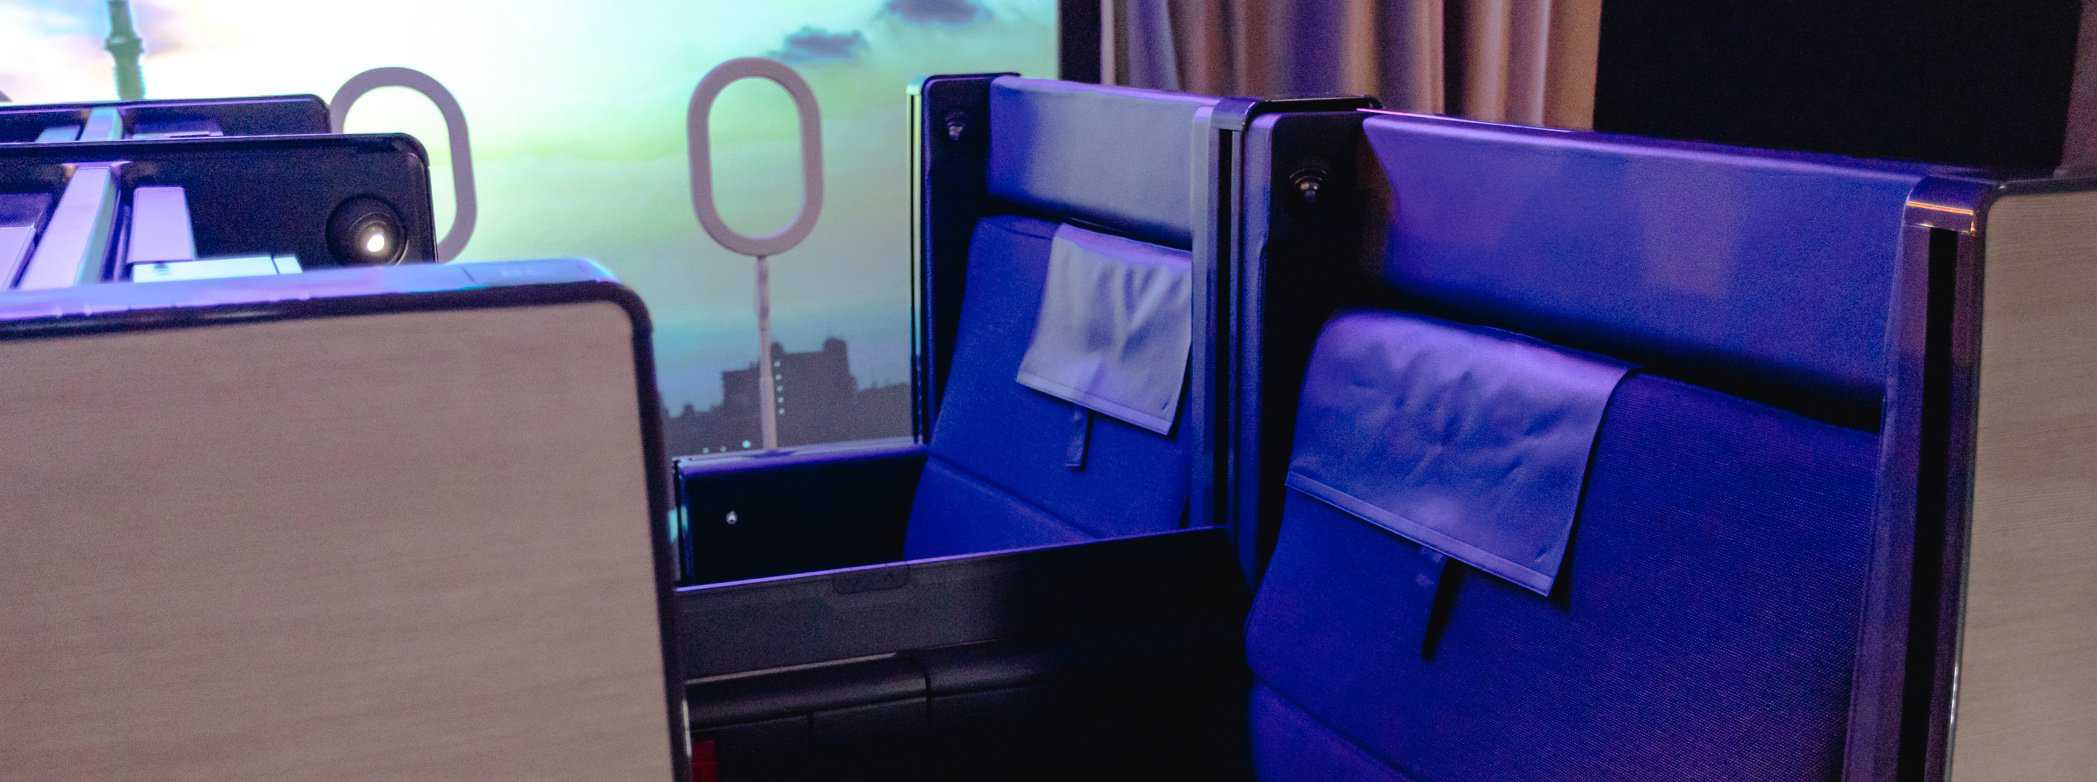 ANA’s New 777 Business Class Seat: Comfort By Design